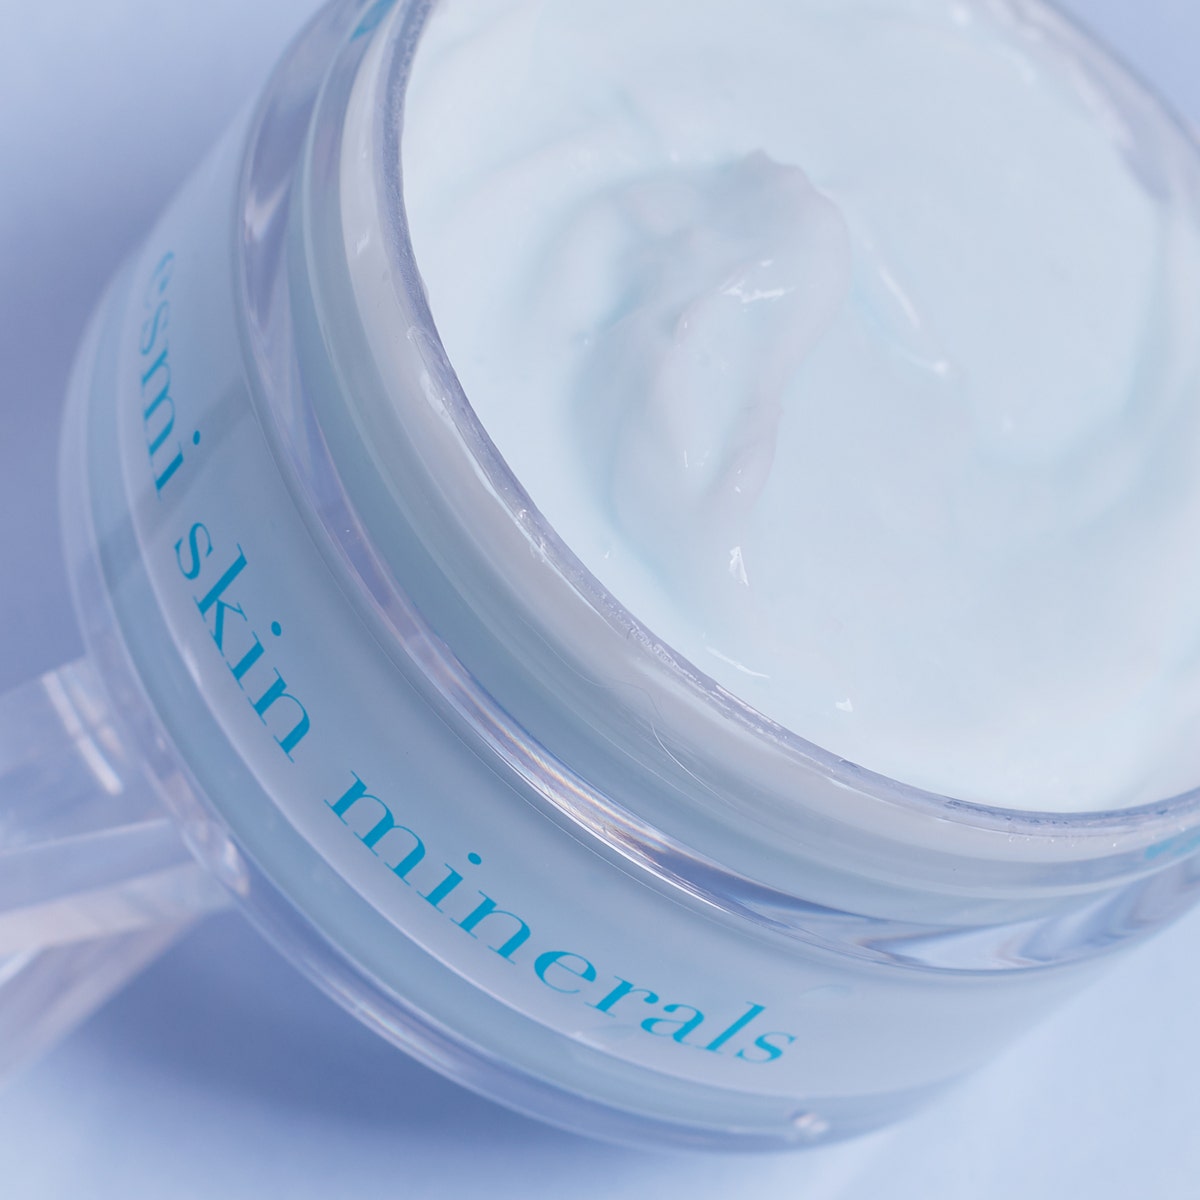 esmi Skin Minerals Hyaluronic Hydrating Booster Face Mask